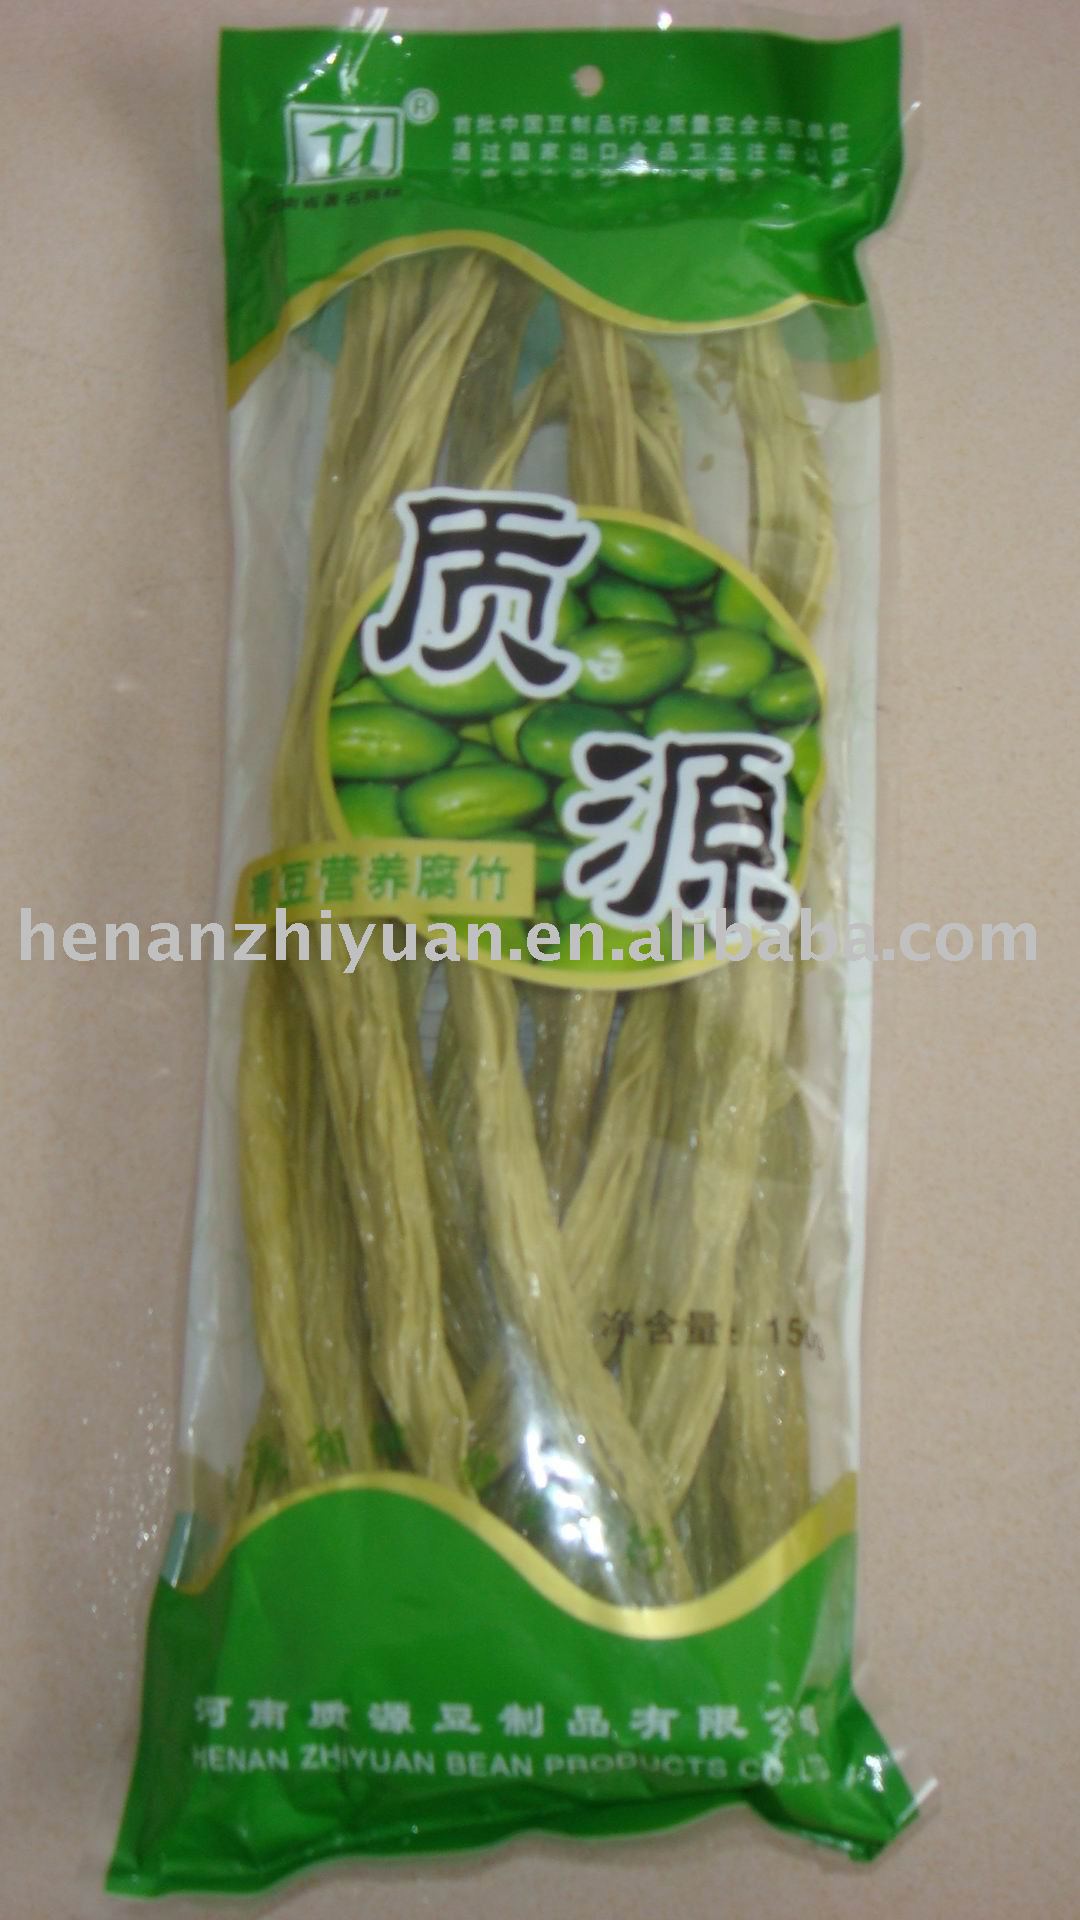 Chinese dried  foodstuff,bean products,yuba,dried bean curd stick,soya products